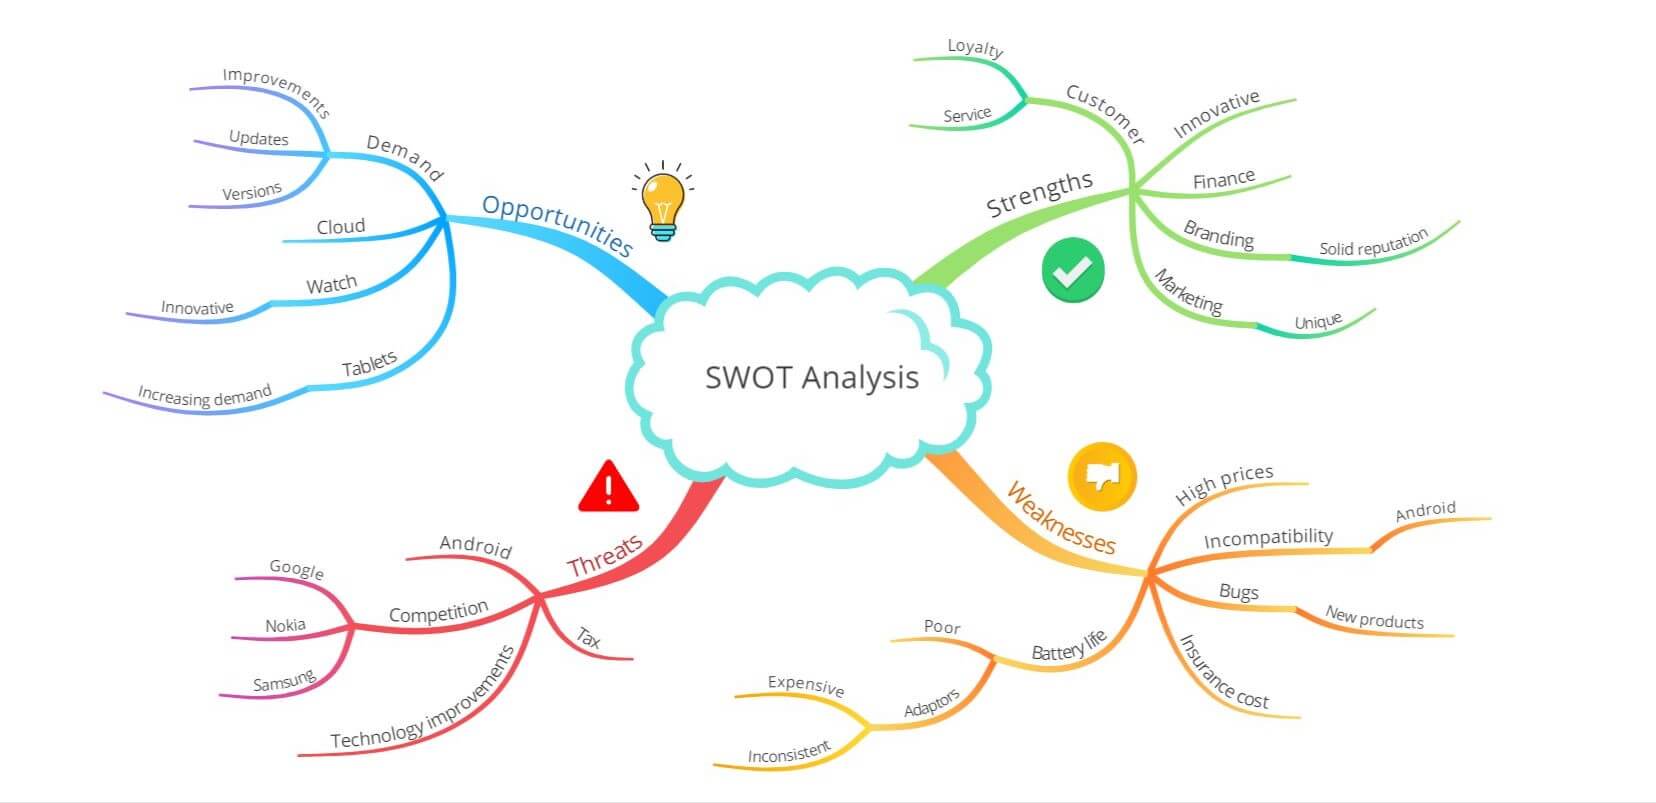 SWOT analysis mind map in ayoa